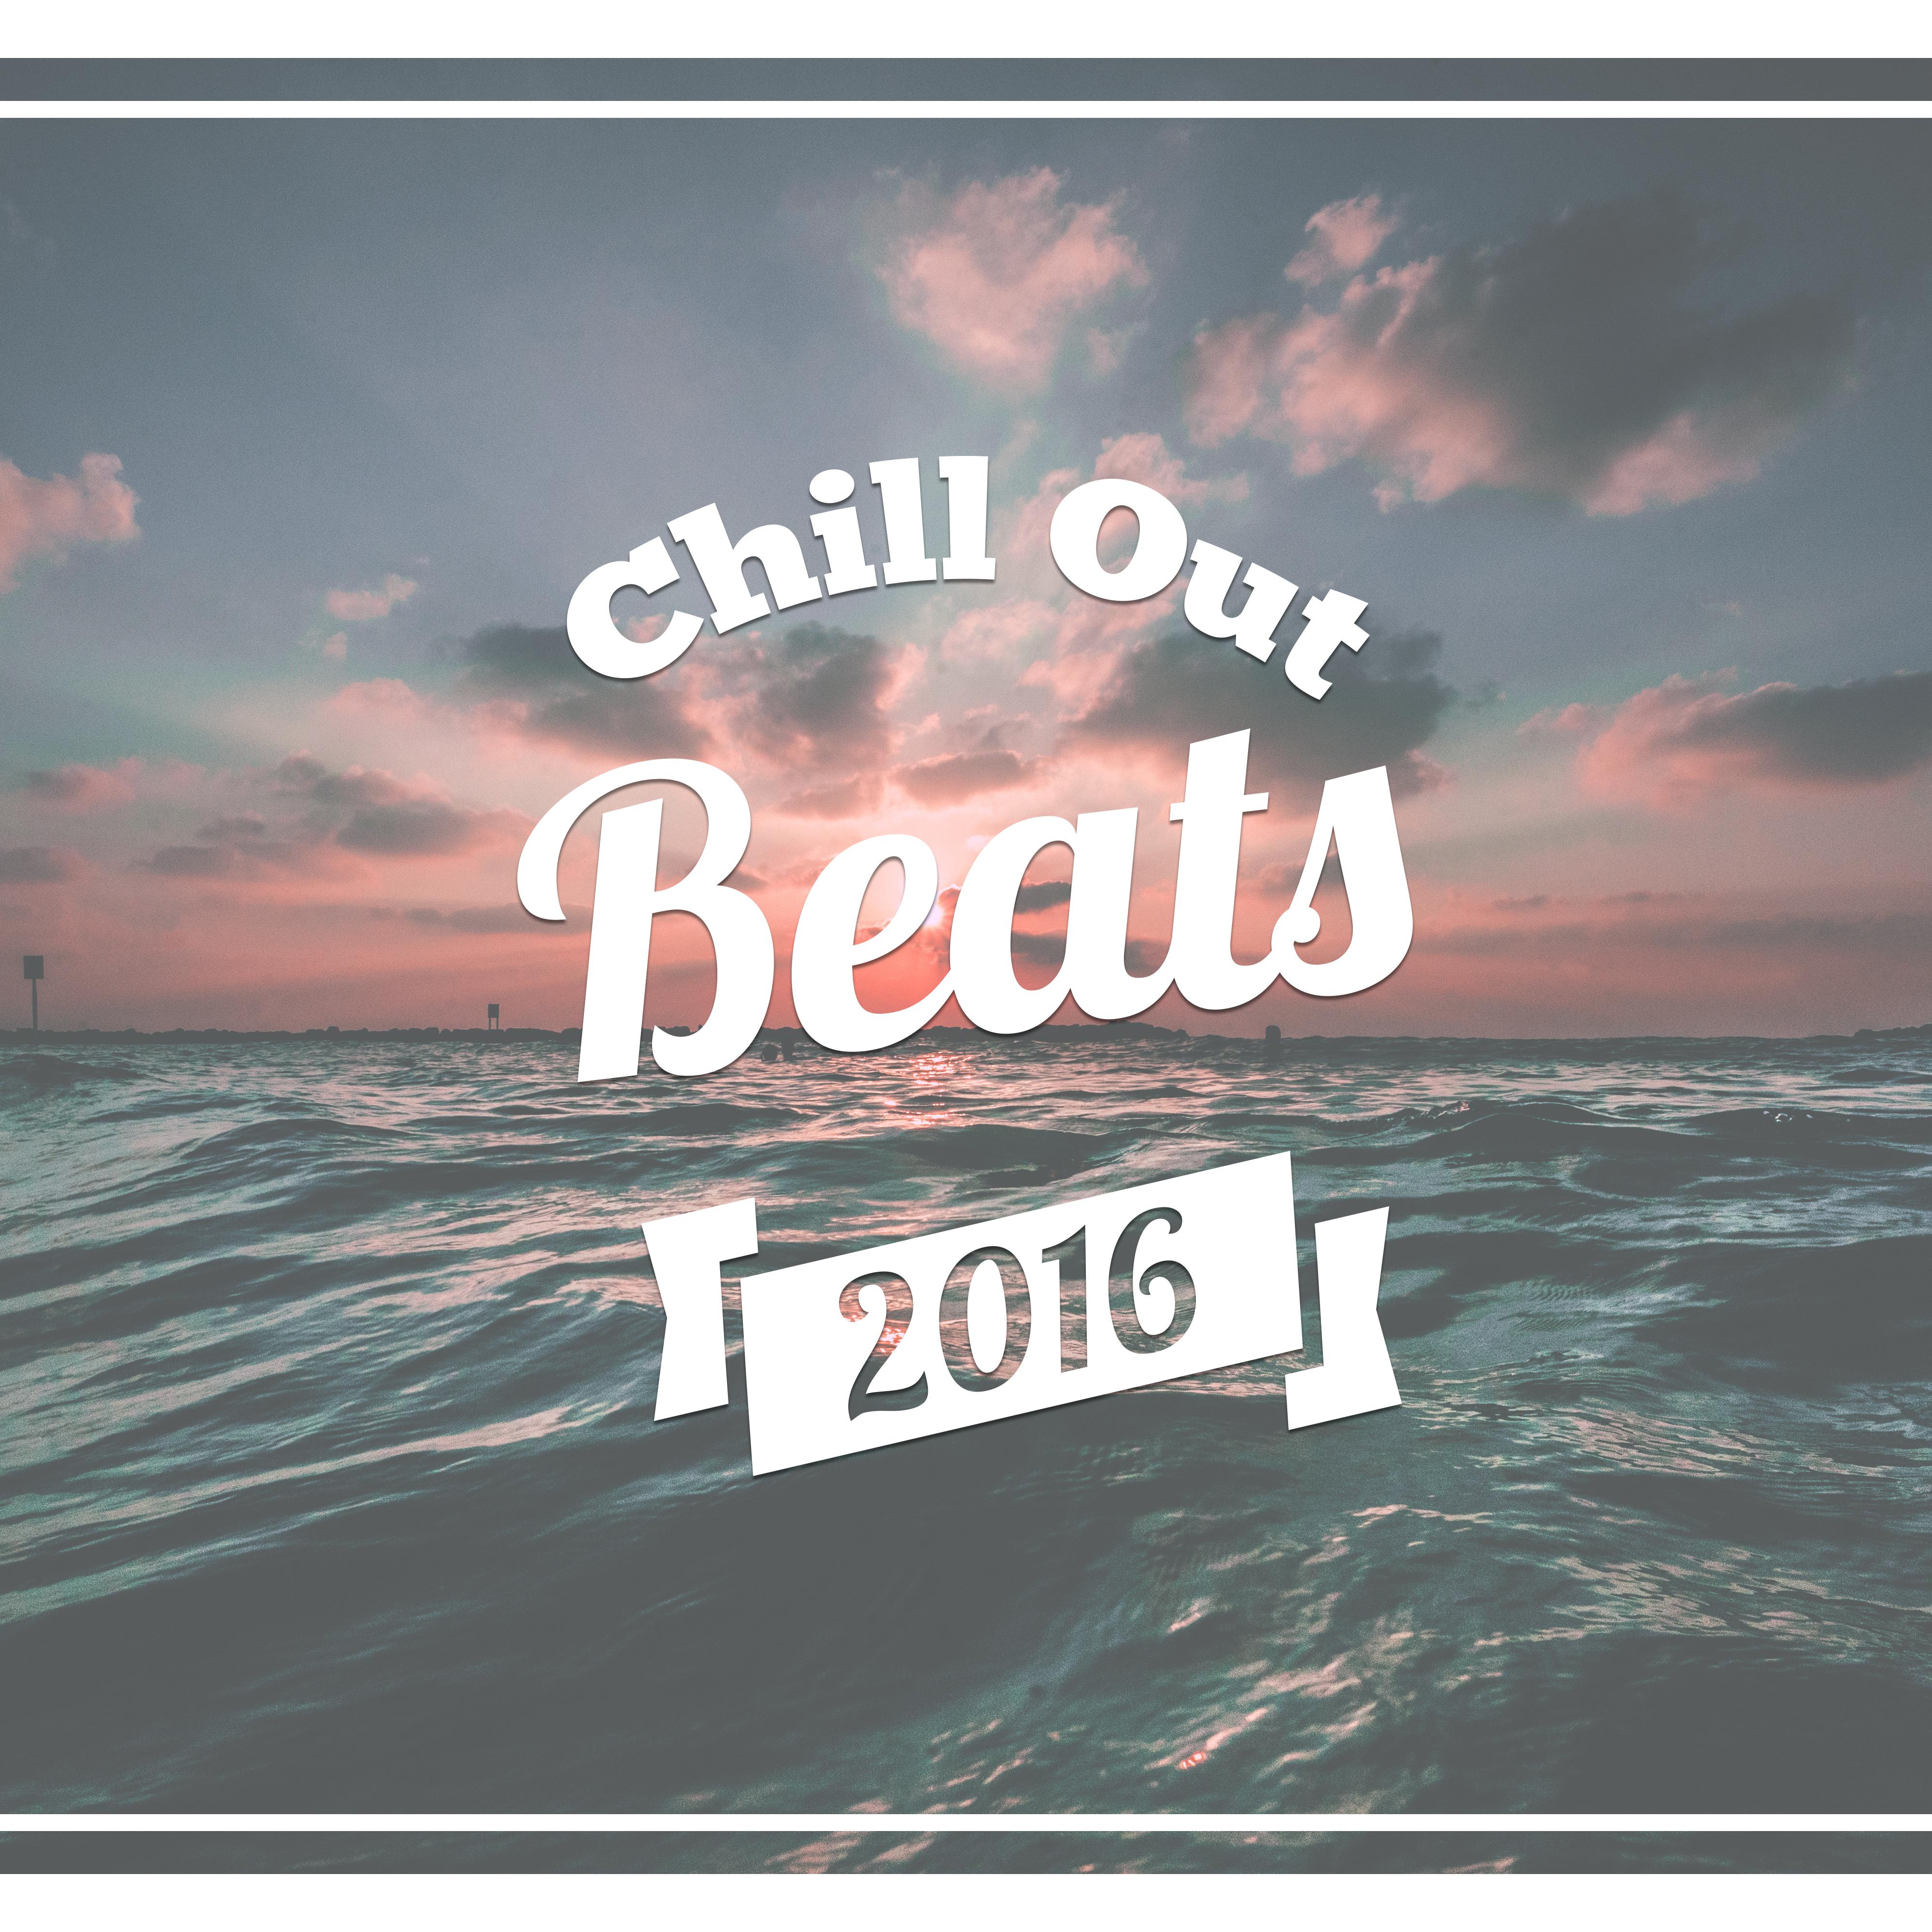 Chill Out Beats 2016 – Best Chill Out Music, **** Vibes of Chill Out, Ocean Dreams, Chill Out Lounge Summer, Step by Step Toward the Sun